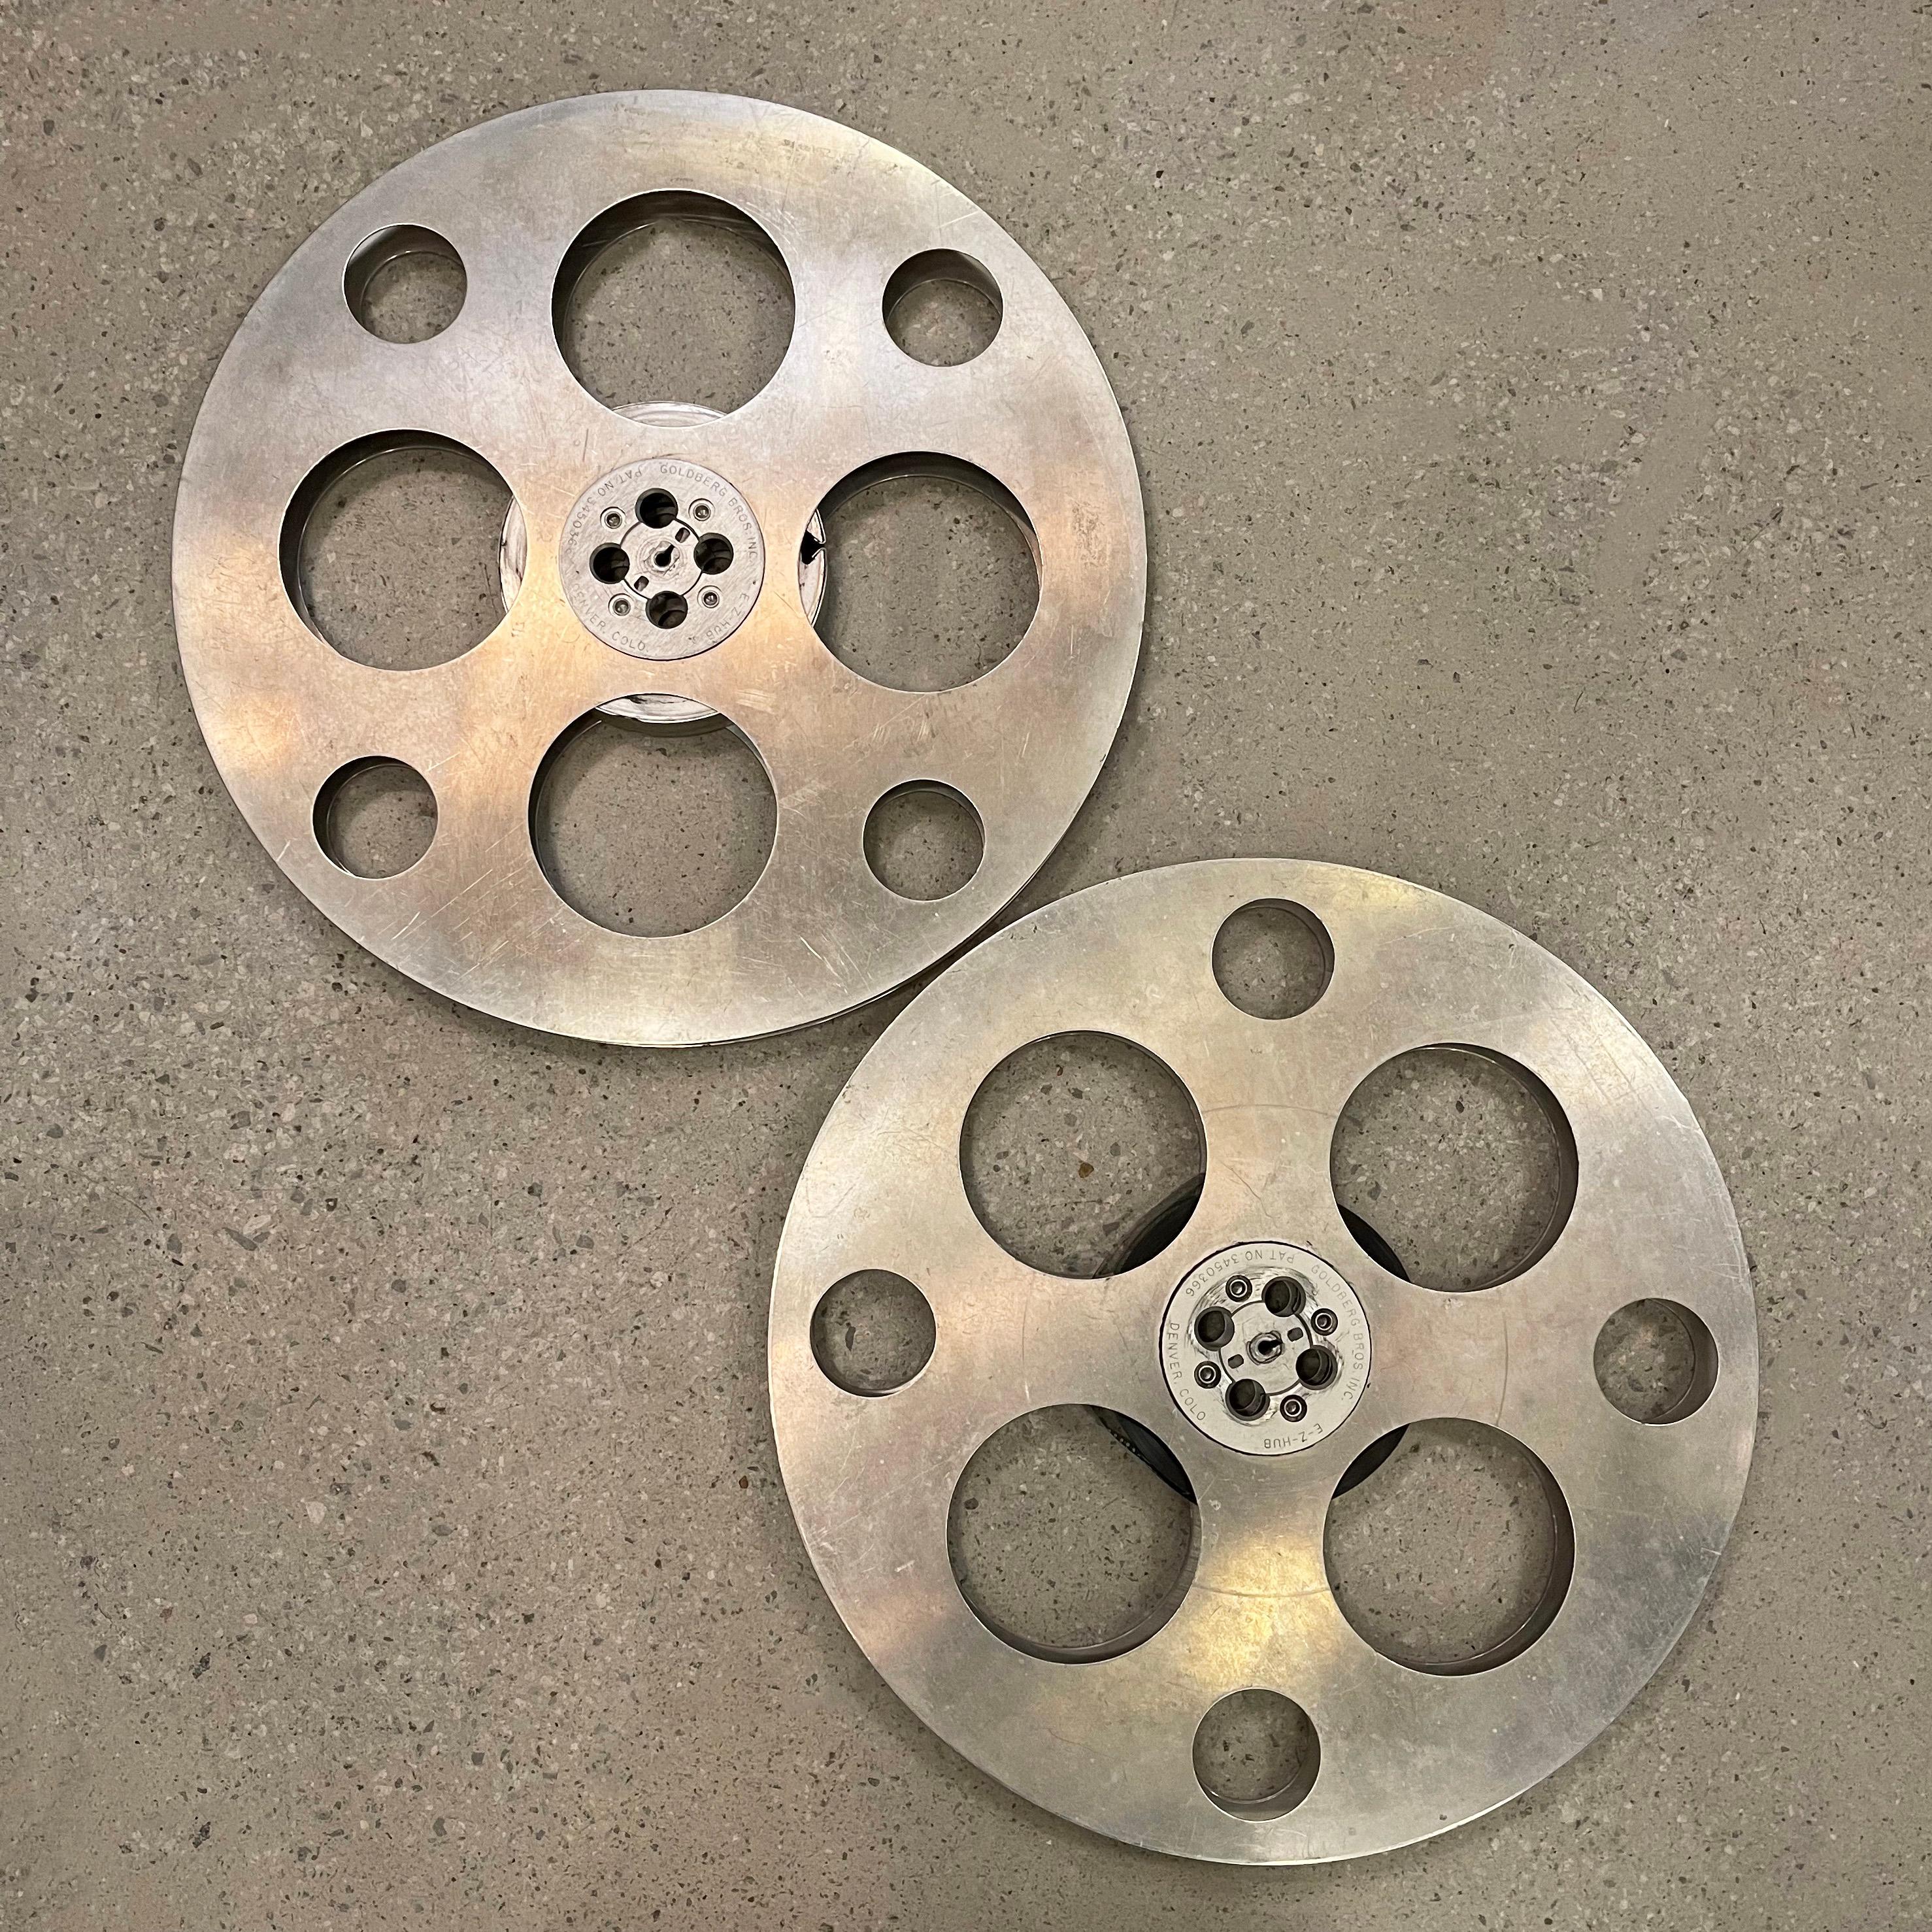 Large, 24 inch diameter, industrial, midcentury, film reels by Goldberg Brothers are great accent pieces or wall hangings. Both are clean on one side and have their original markings on the other  side. One reel still has film wound inside. Sold